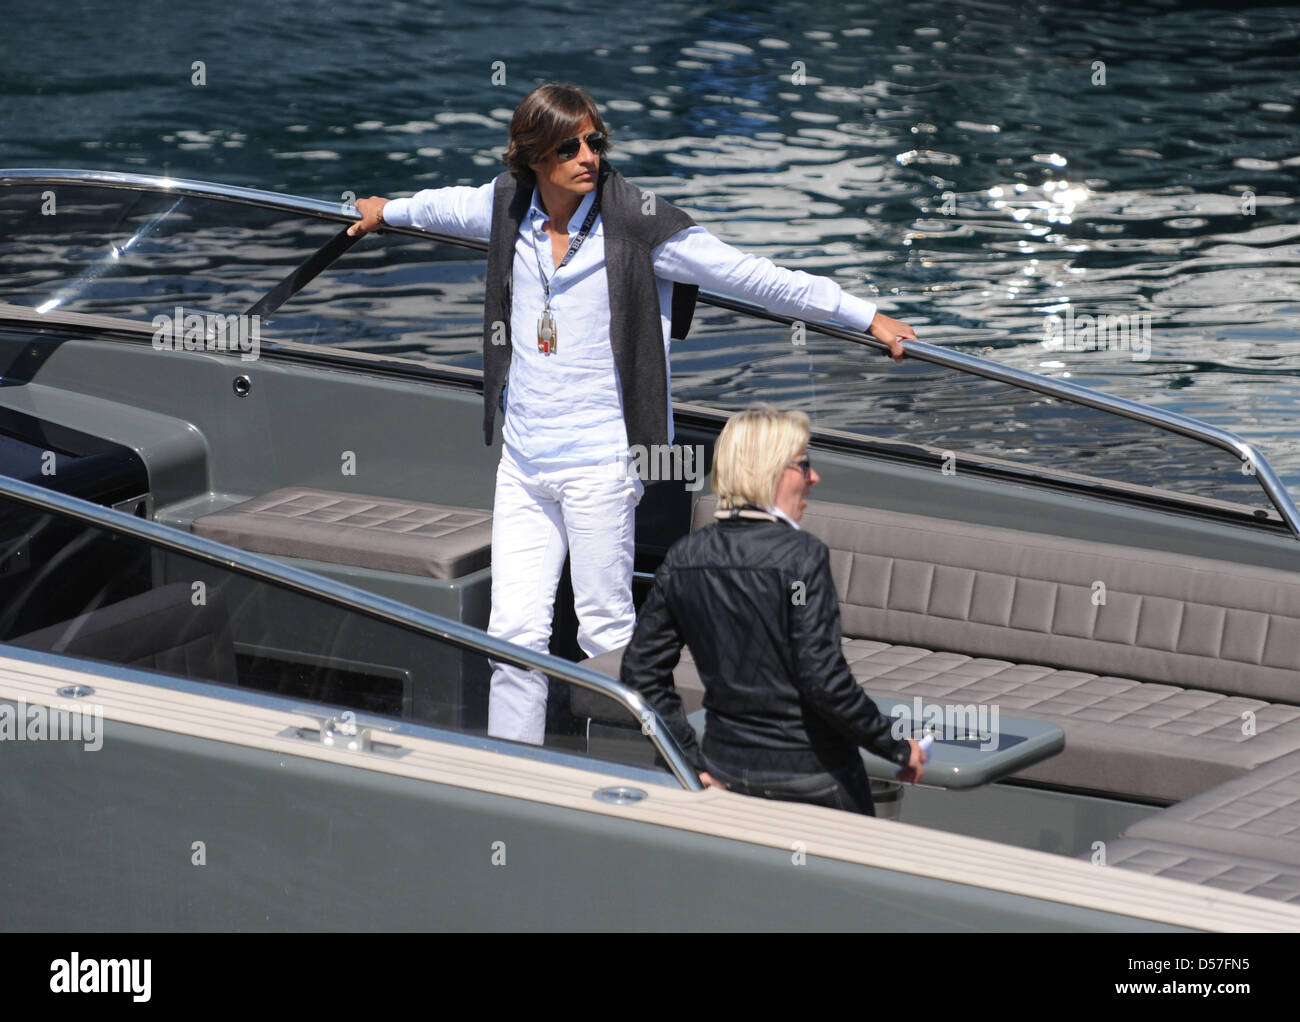 Designer Fiona Swarovski and Austria's former Finance Minister Karl-Heinz Grasser (L) on a motorboat in the harbour of Monte Carlo, Monaco, 14 May 2010. Photo: Peter Steffen Stock Photo